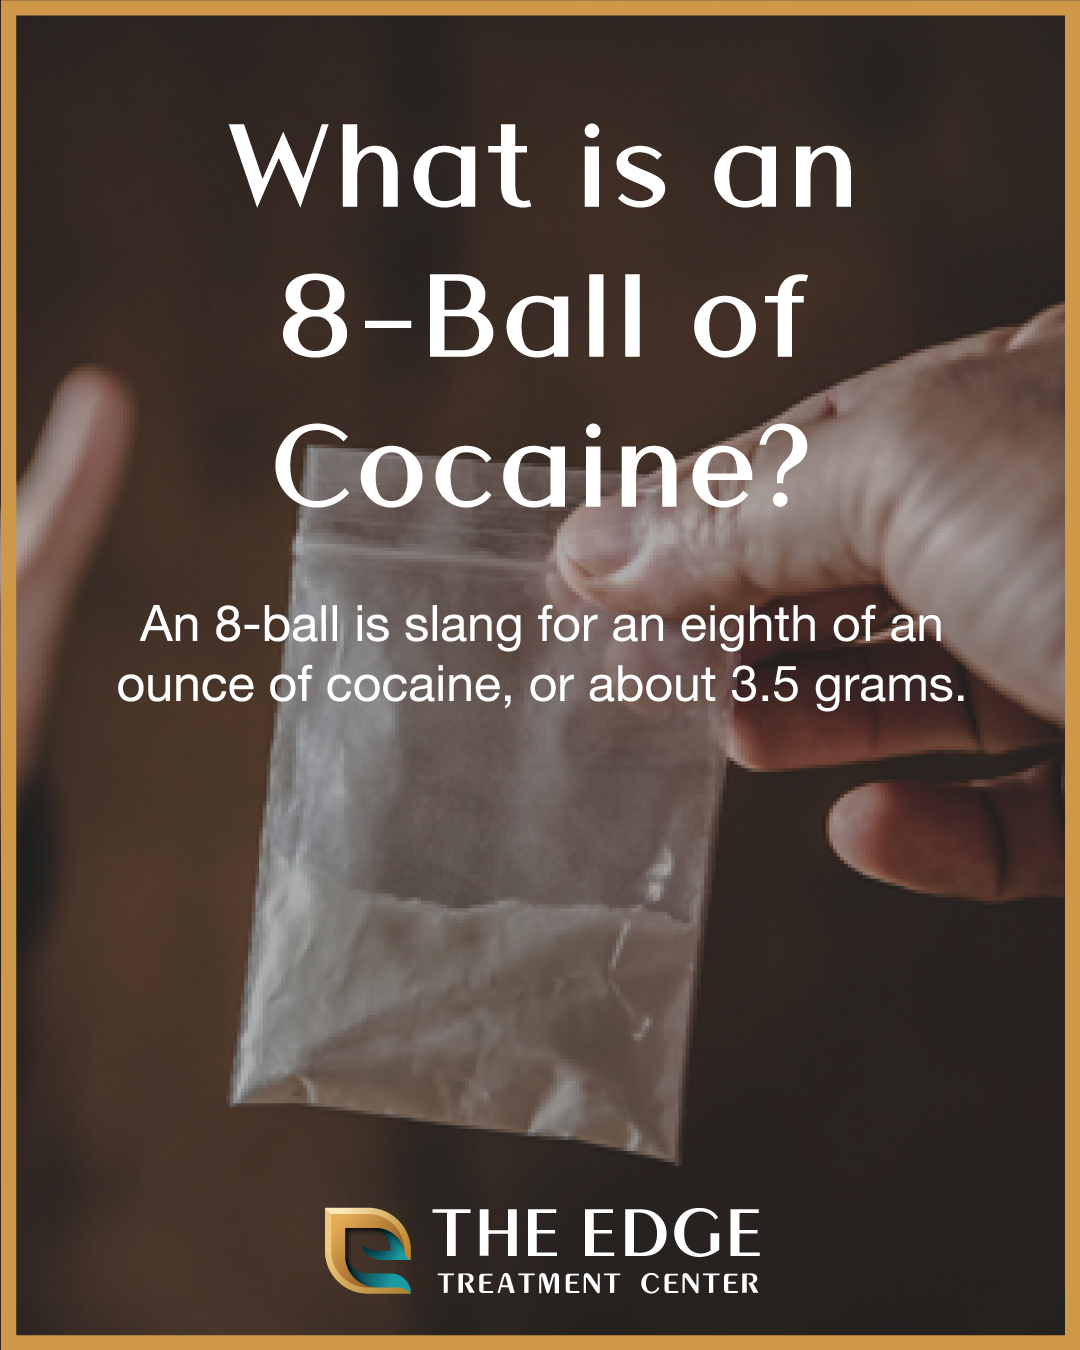 How many grams are in an 8-ball of coke? - Quora